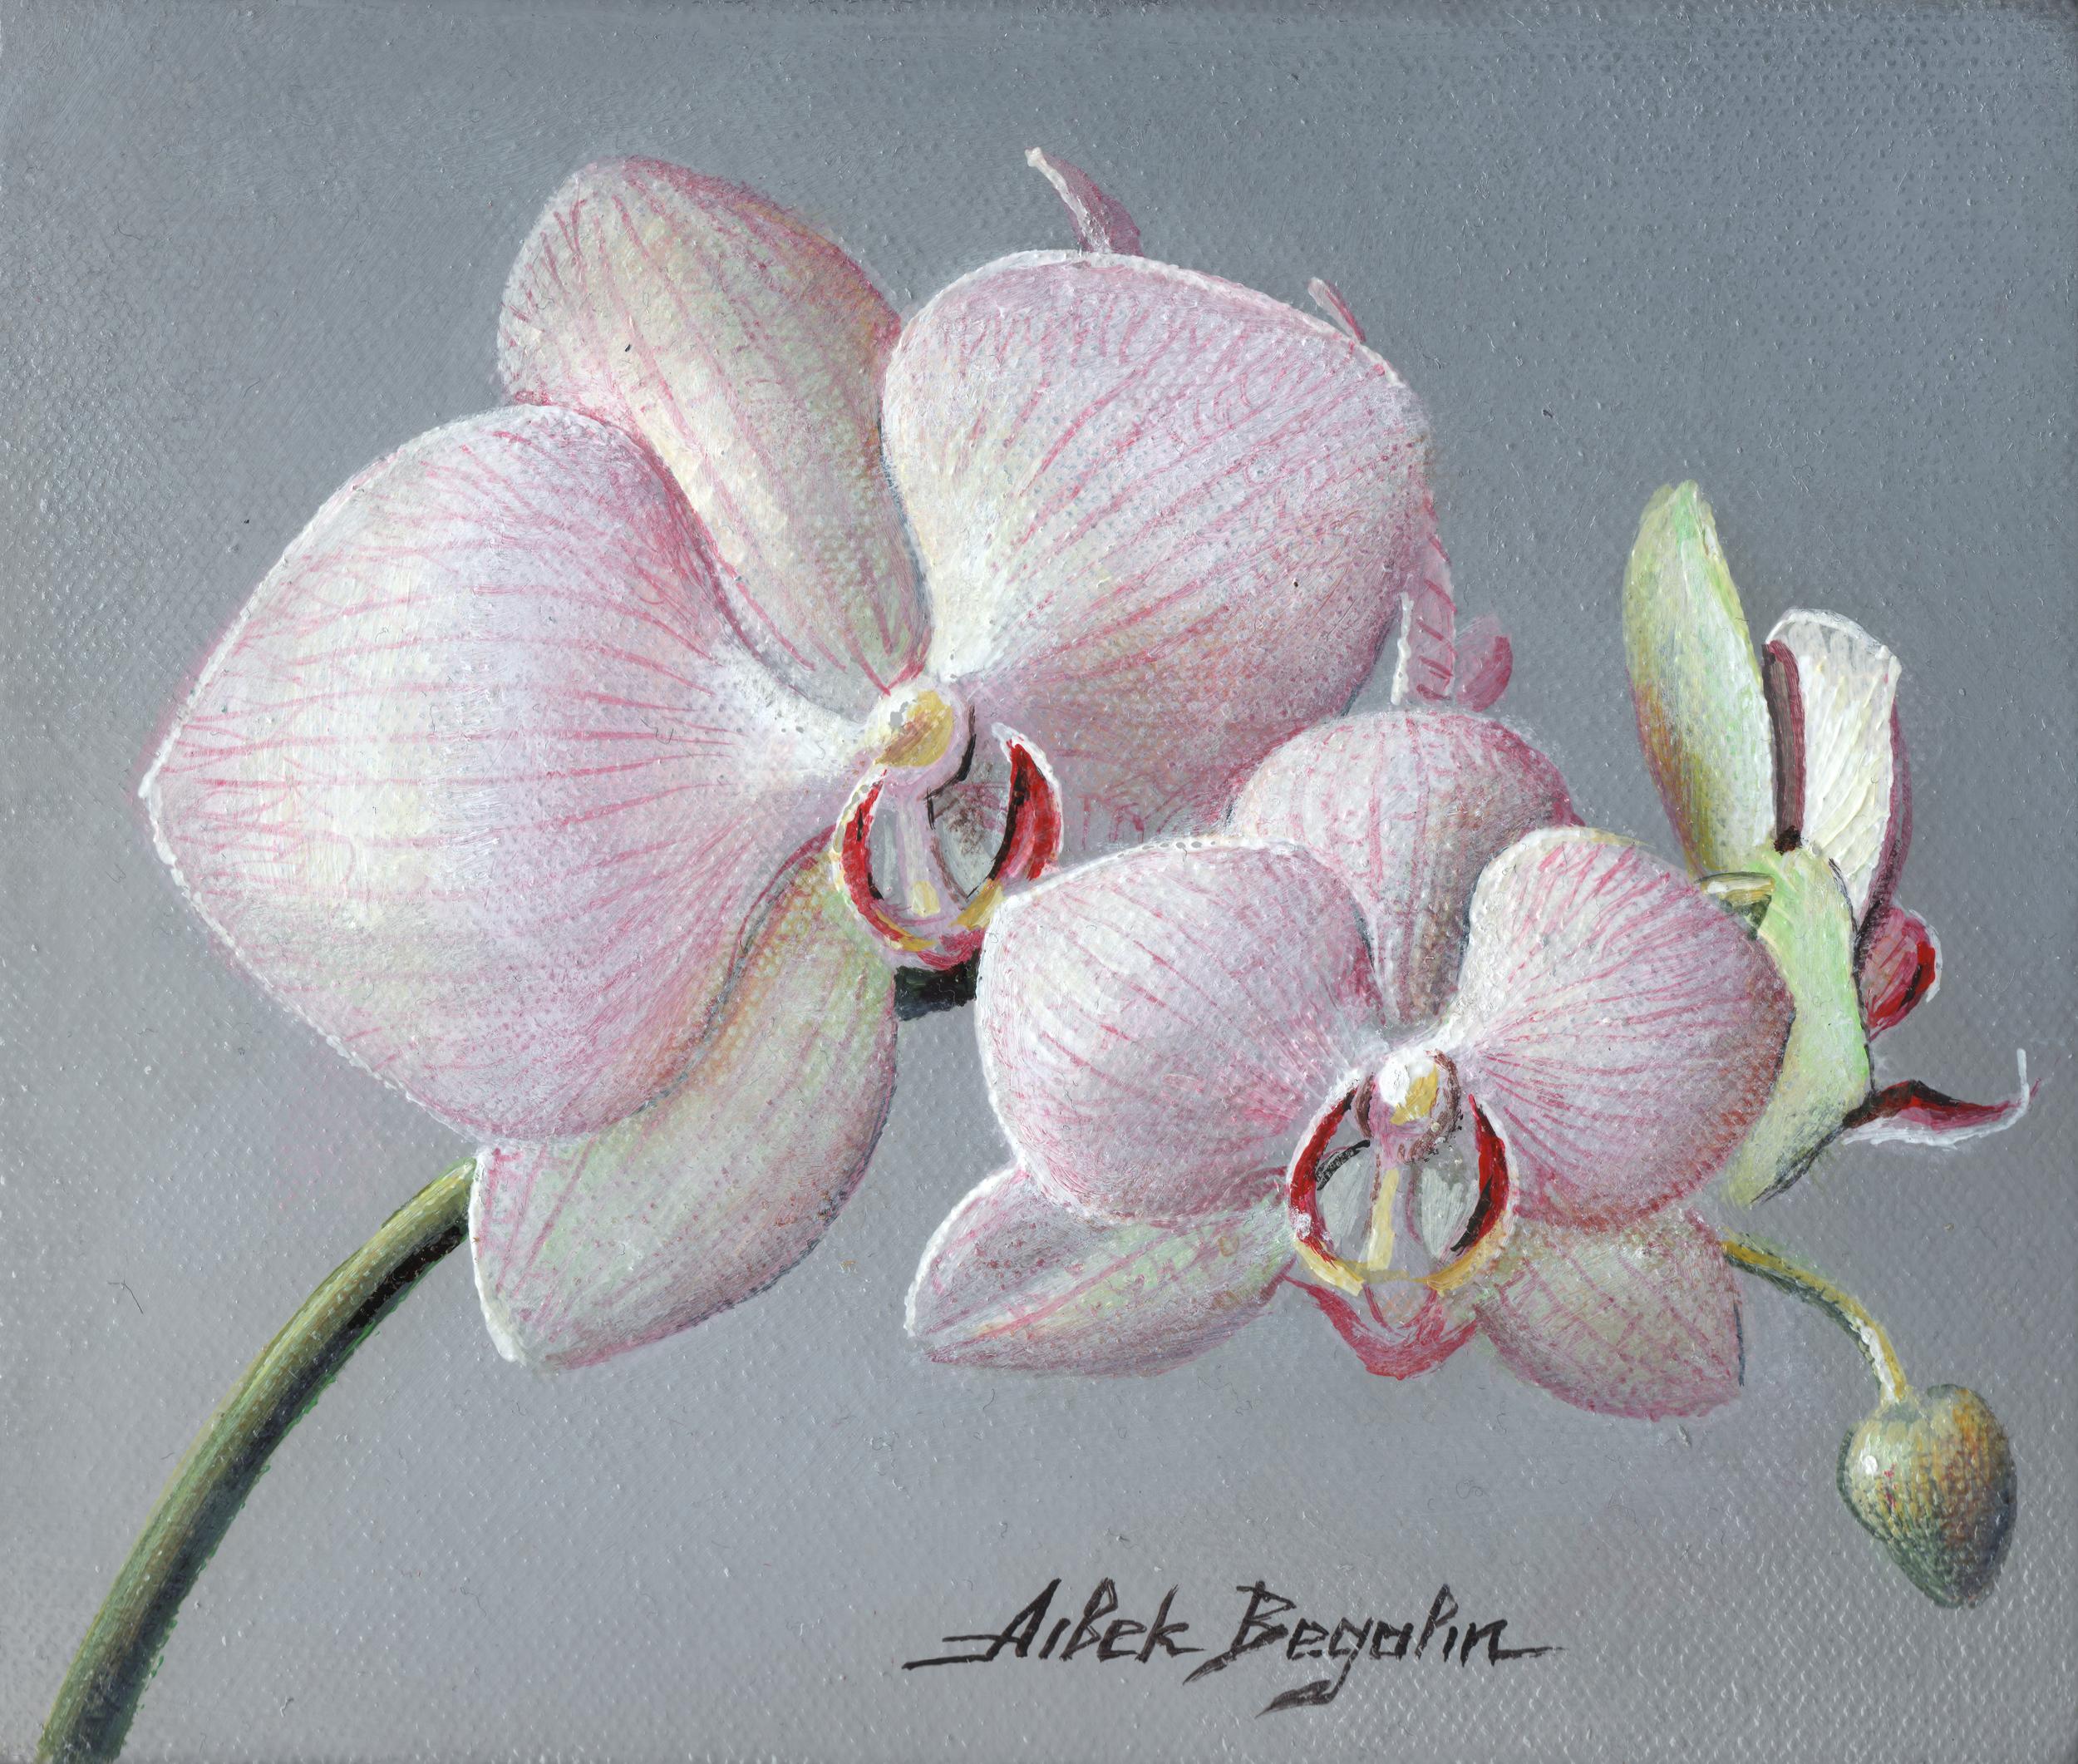 Aibek Begalin Landscape Painting - Orchid, Flowers, Original Oil Painting, Ready to Hang